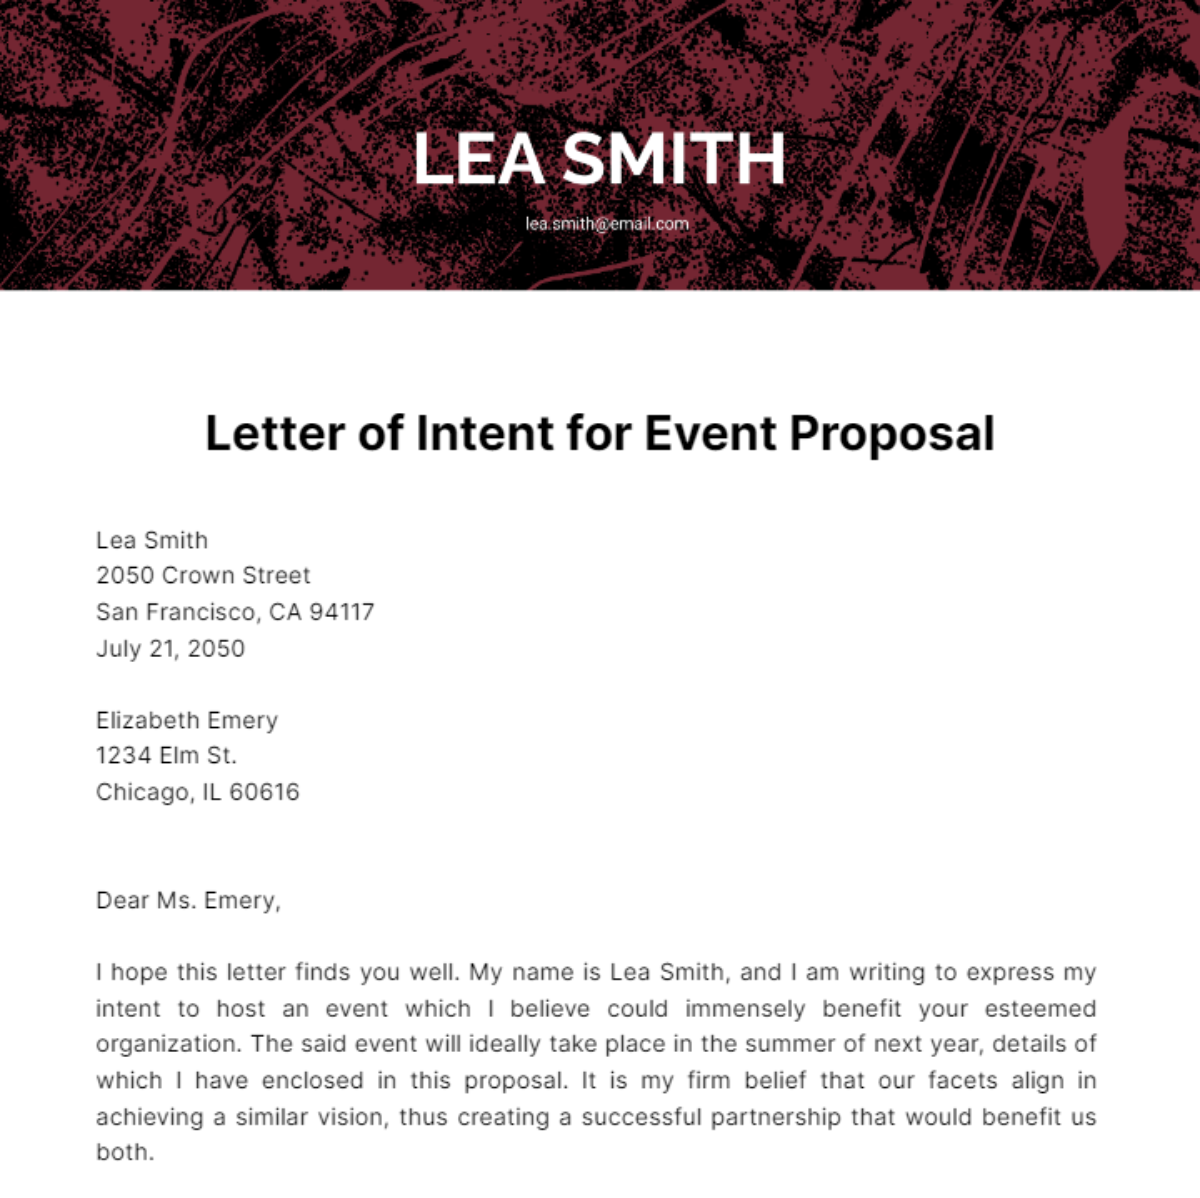 Letter of Intent for Event Proposal Template